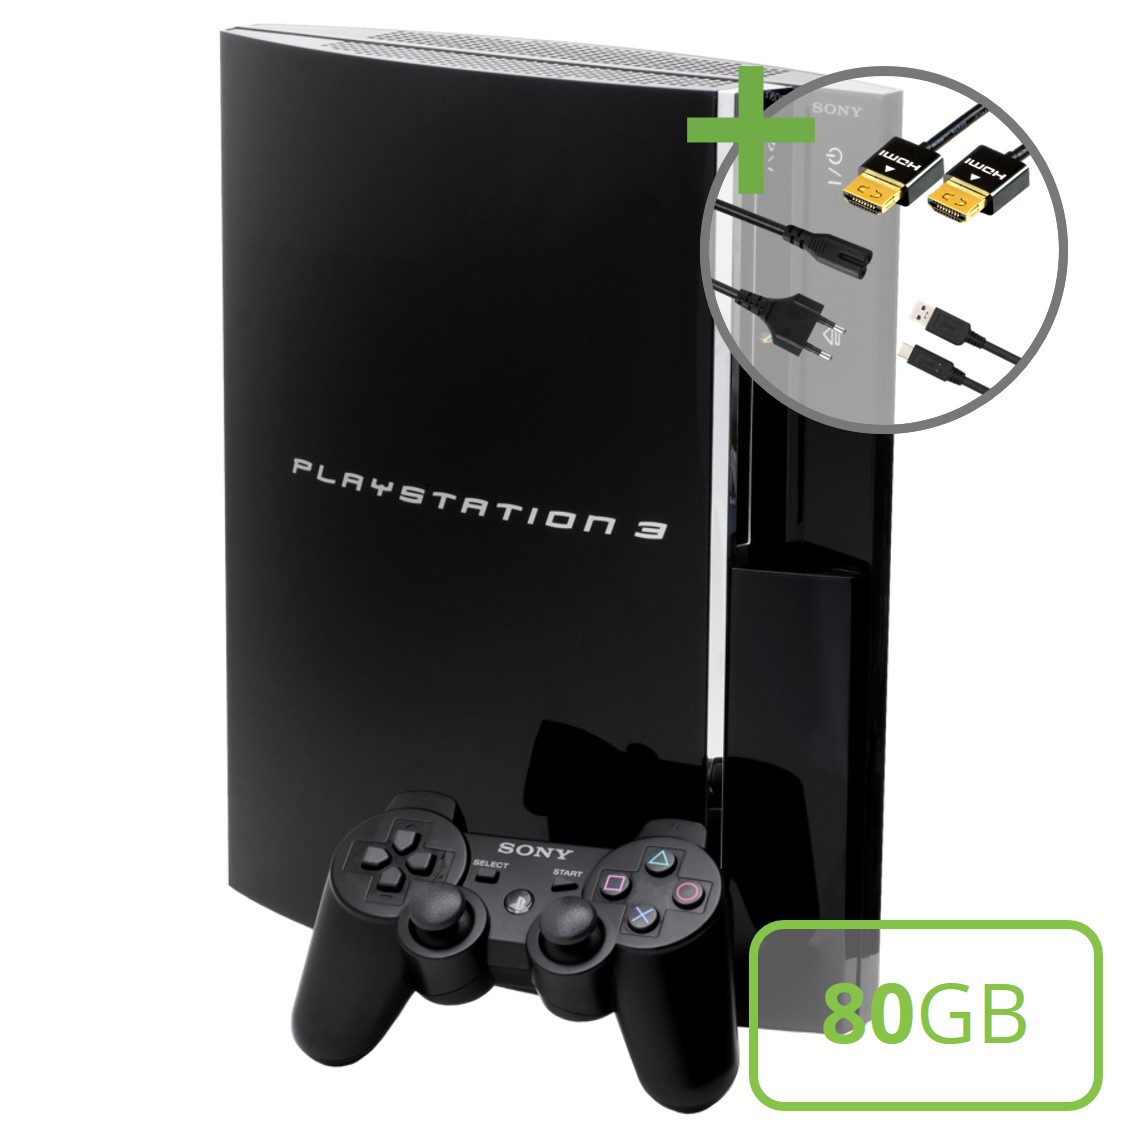 Sony PlayStation 3 Phat (80GB) Starter Pack - Sixaxis Edition - Playstation 3 Hardware - 2